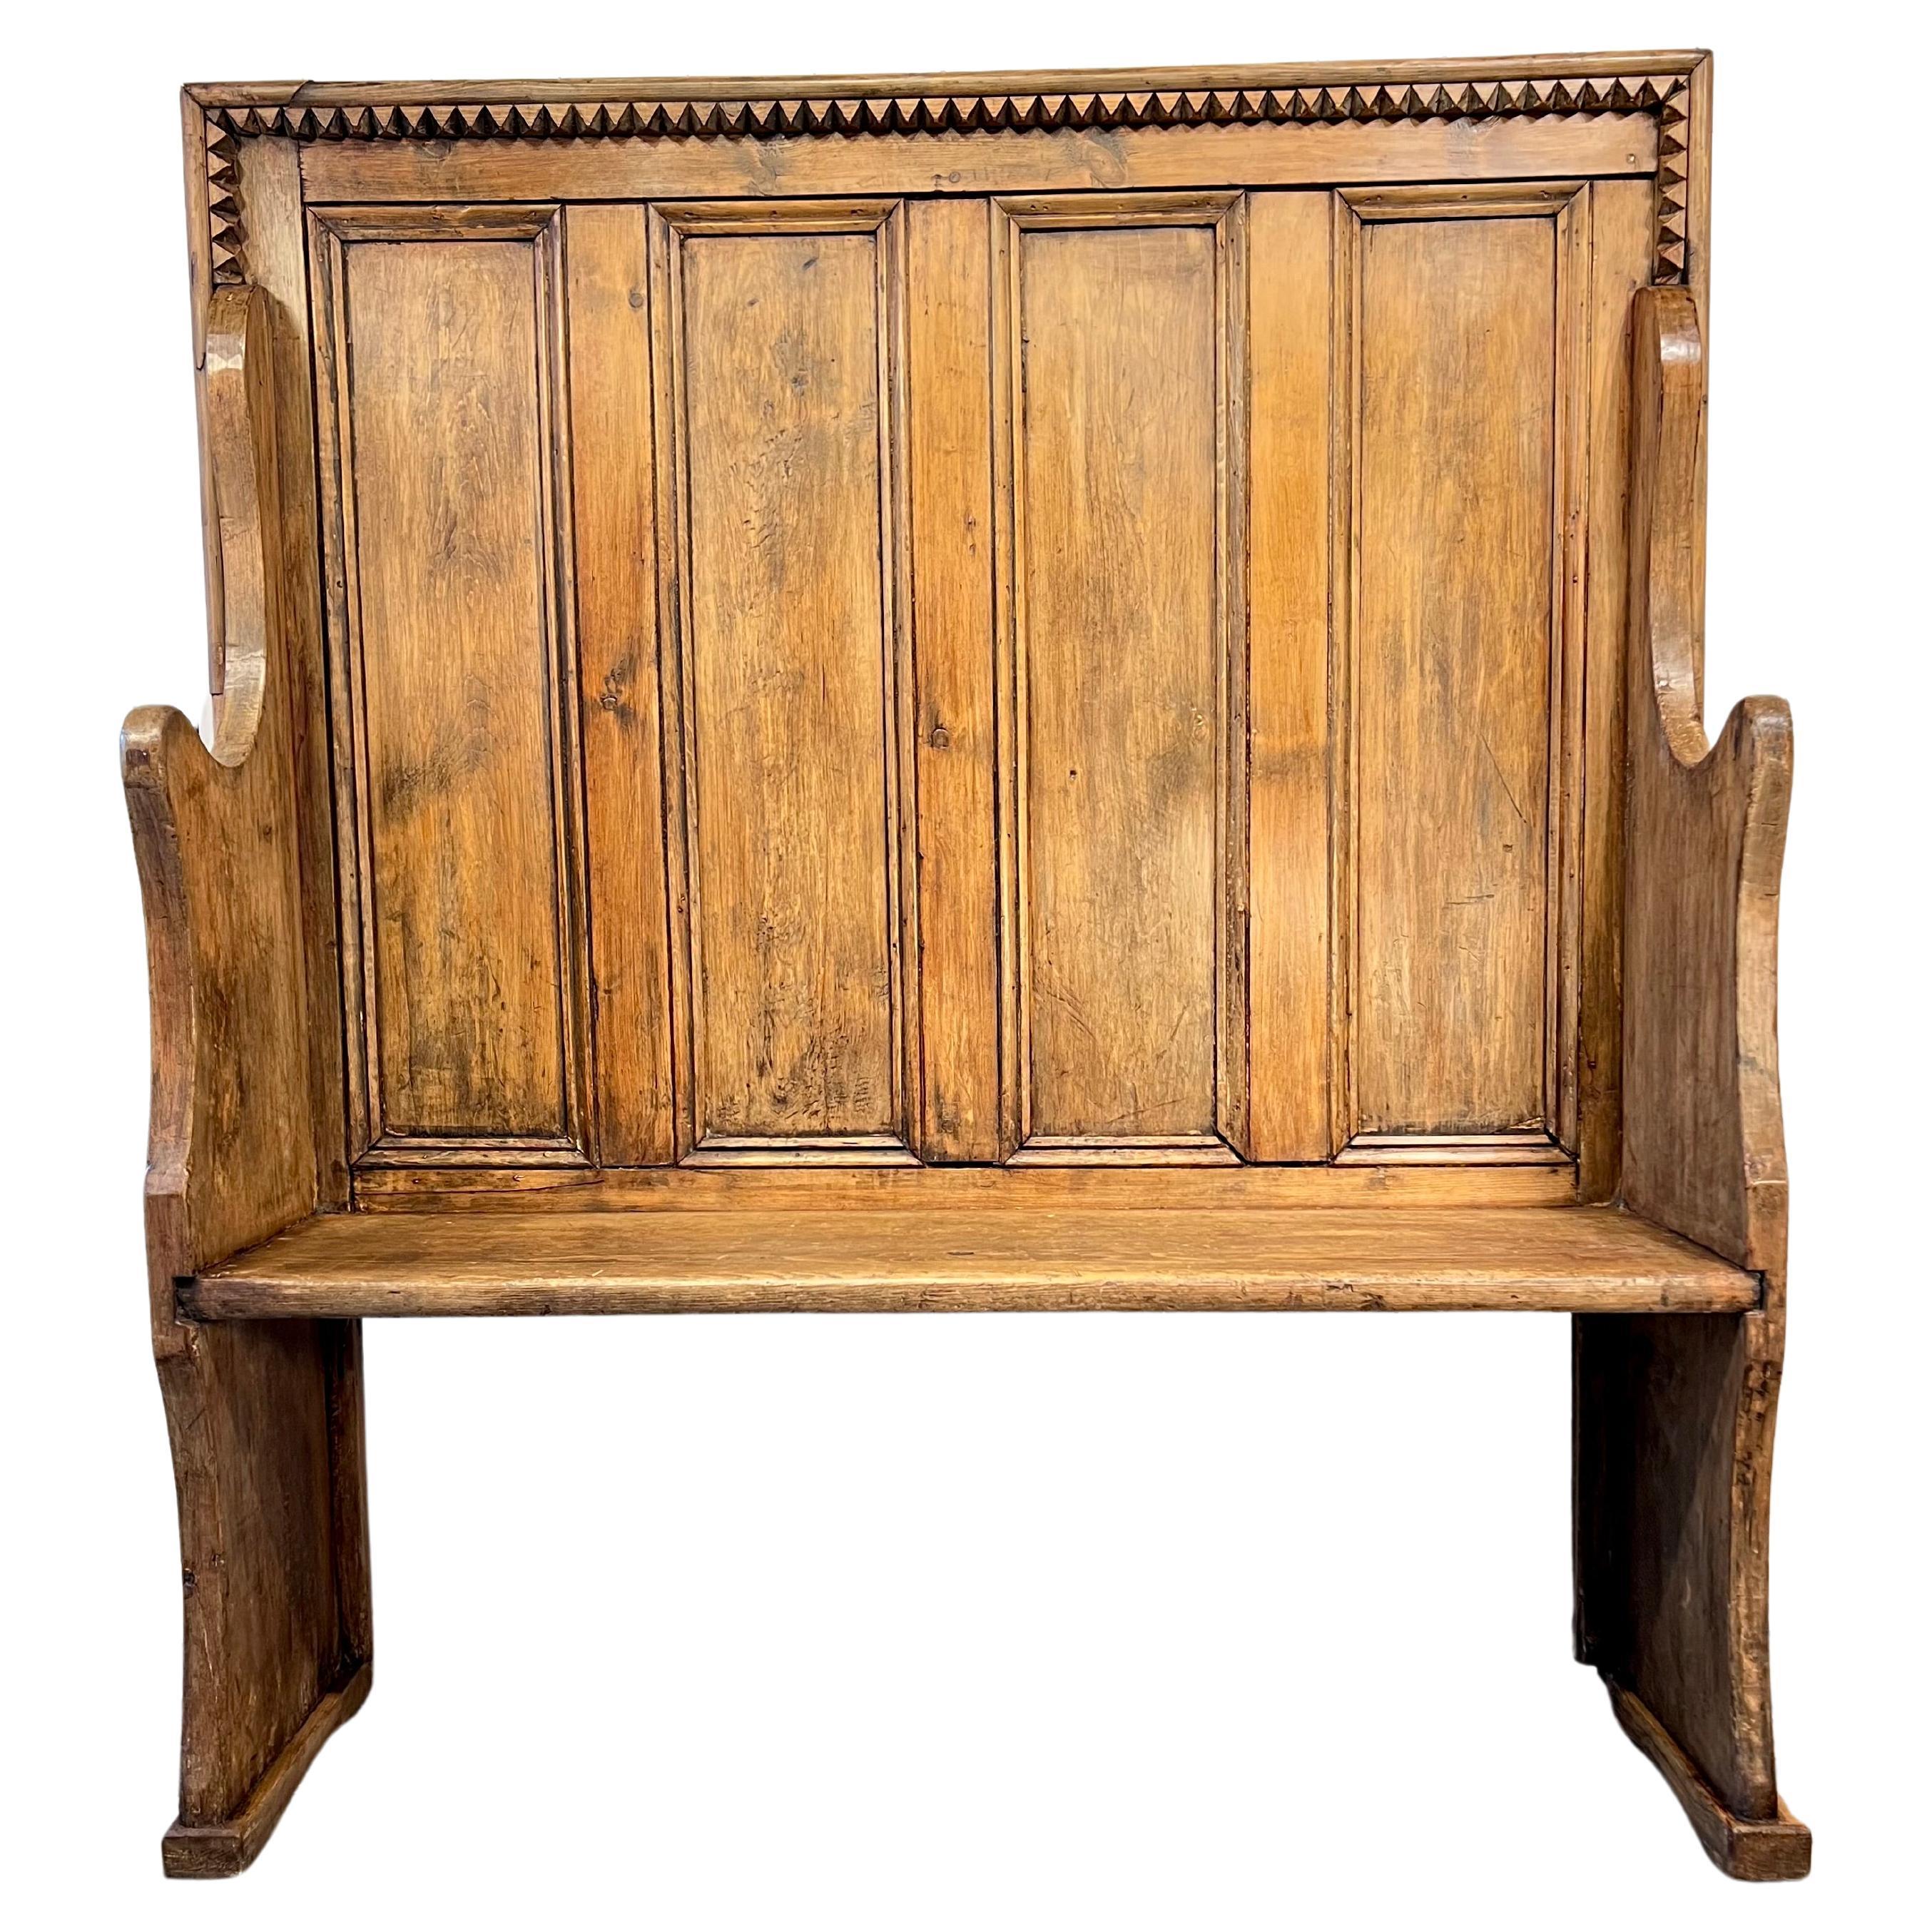 English Victorian Gothic Revival Pine Settle c. 1830's